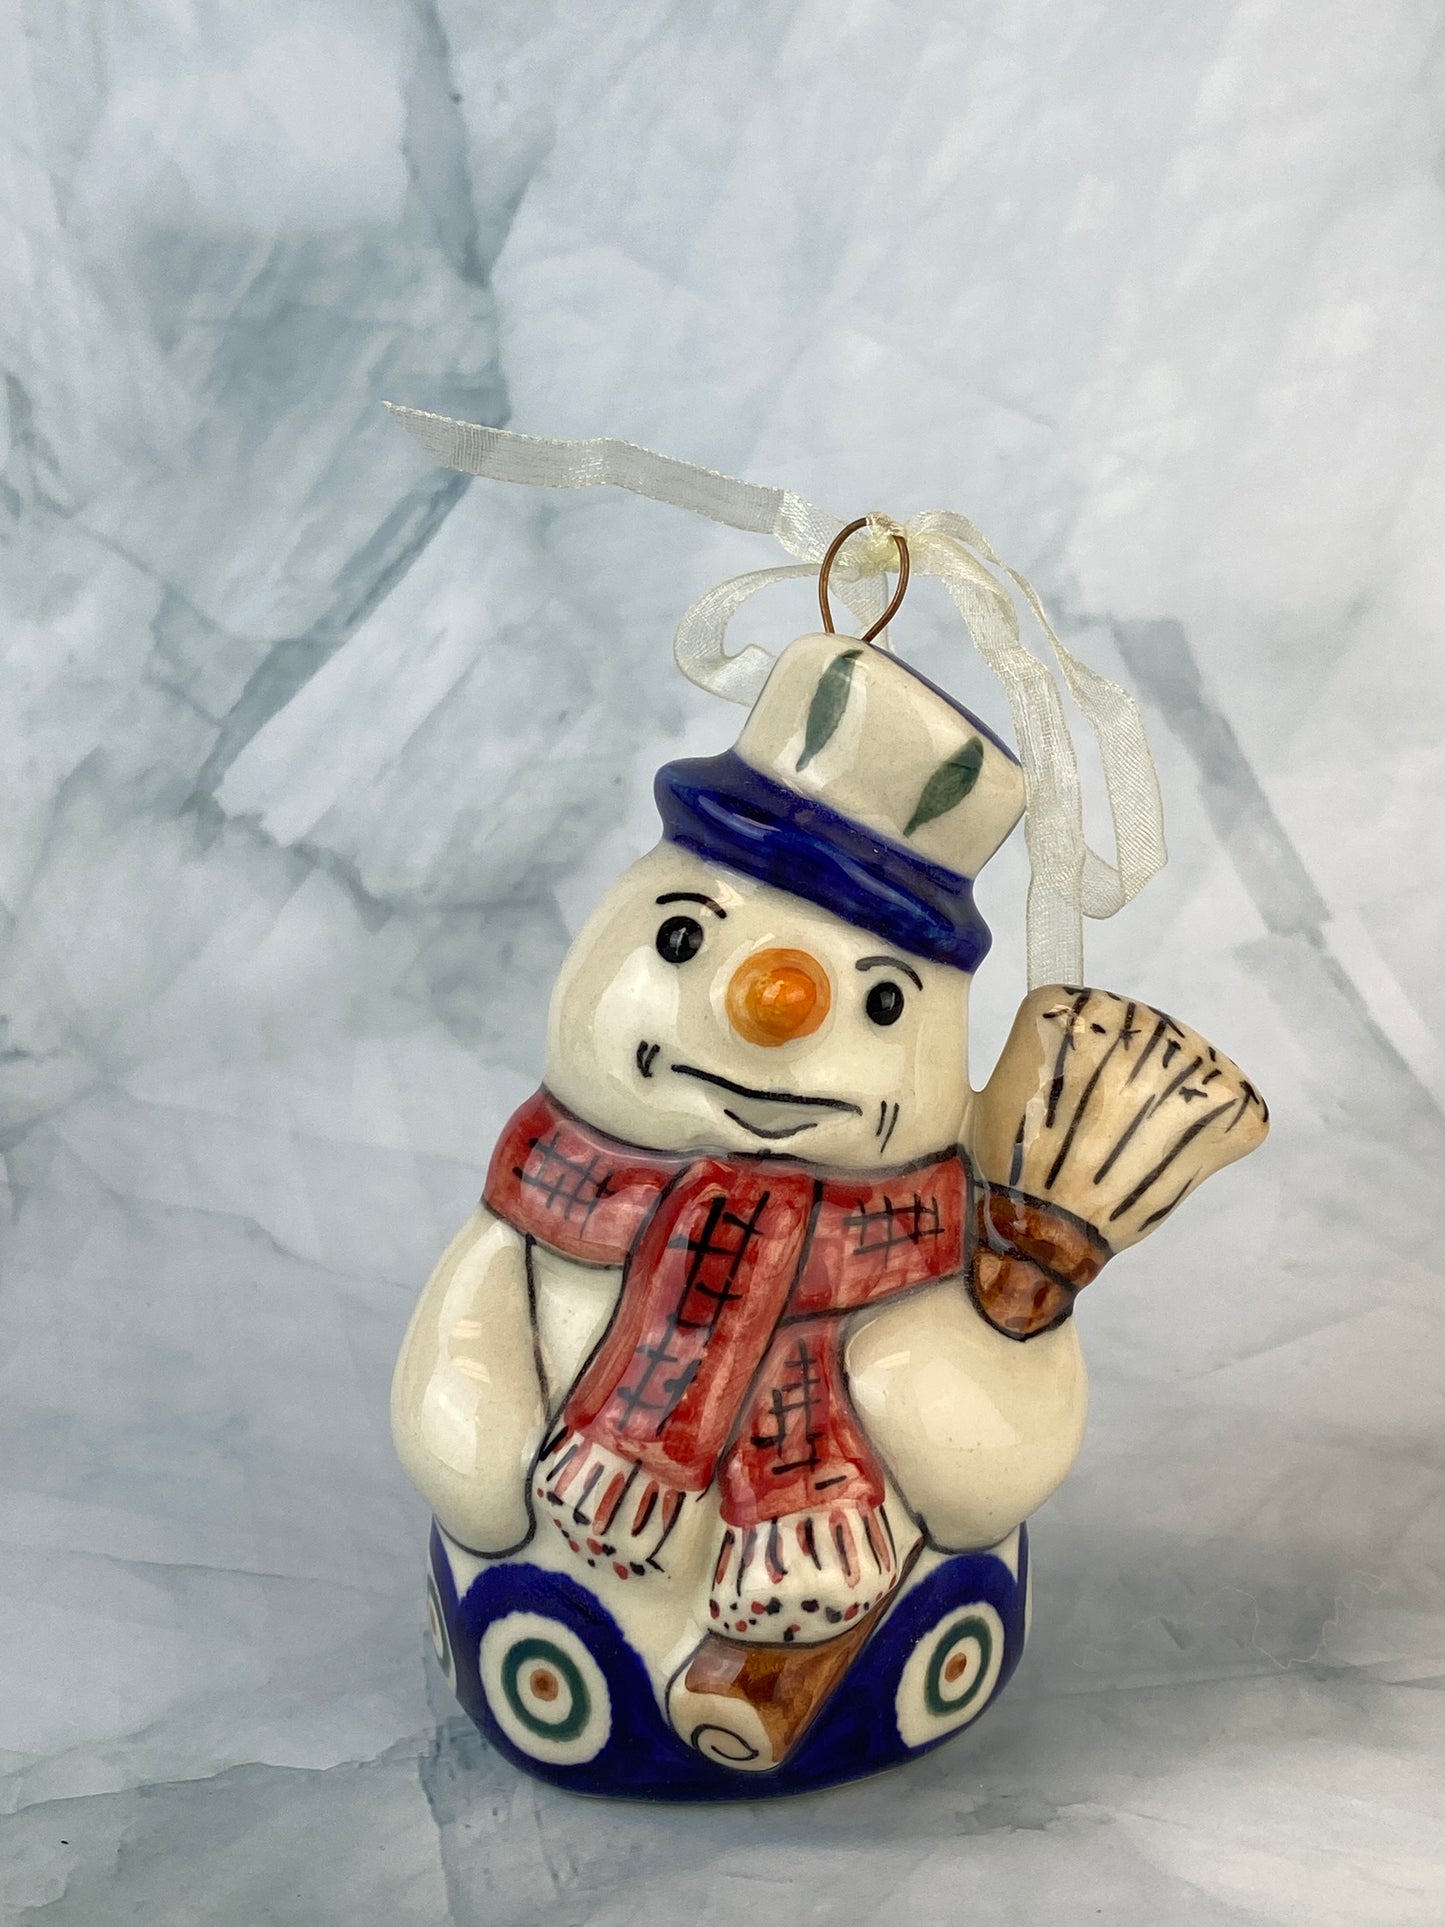 Vena Standing Snowman Ornament - Shape V354 - Red Scarf and Peacock Eye